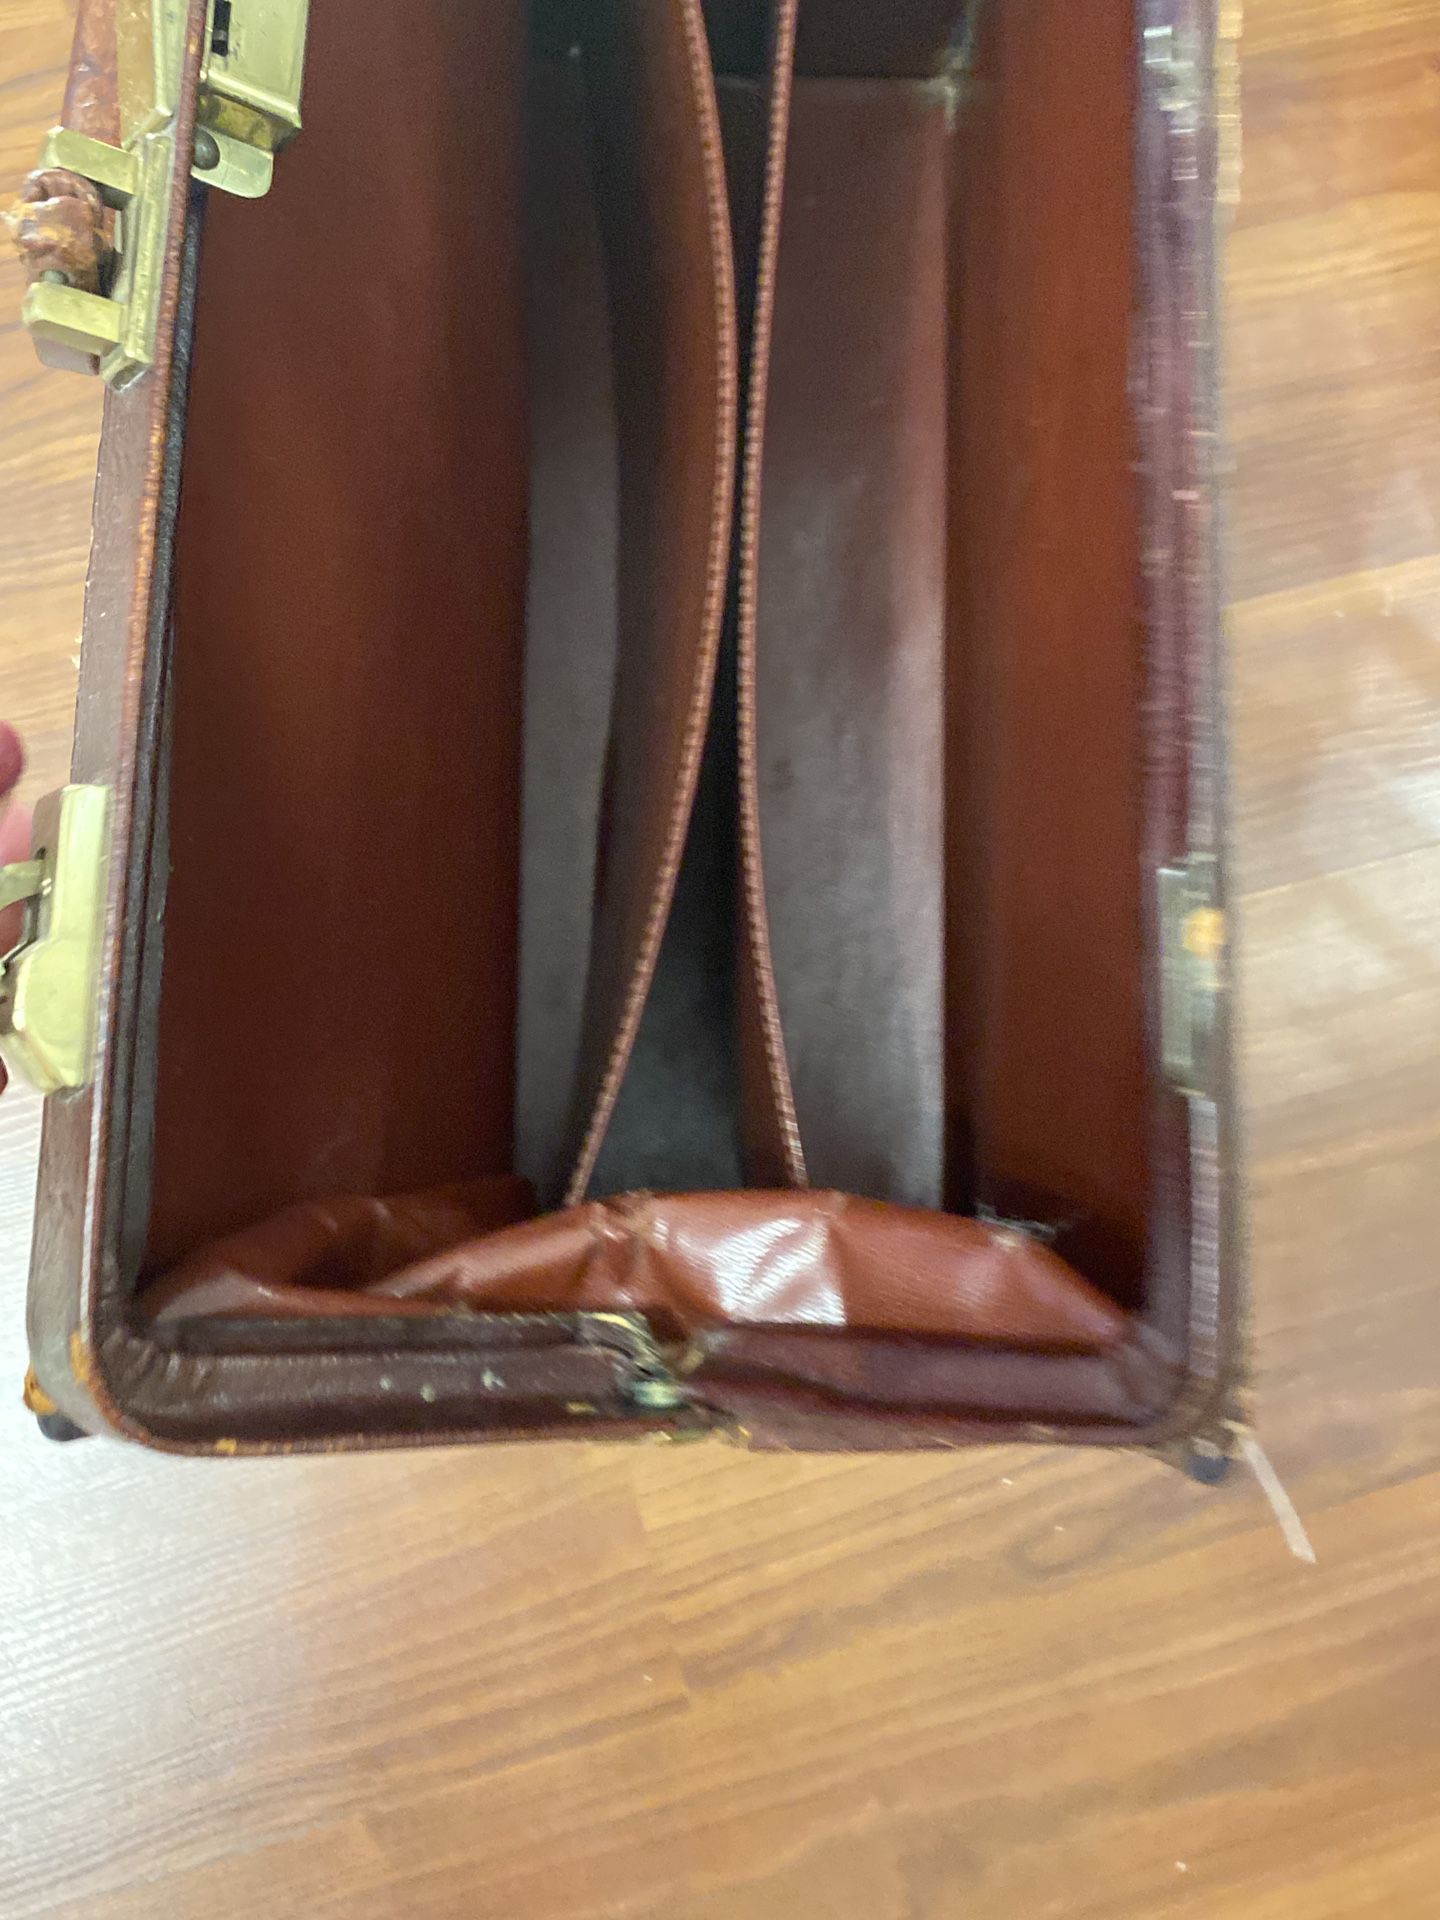 Beautiful Large Antique Leather Gladstone Bag Doctors Style 18”x14”x 8” for  Sale in Norcross, GA - OfferUp